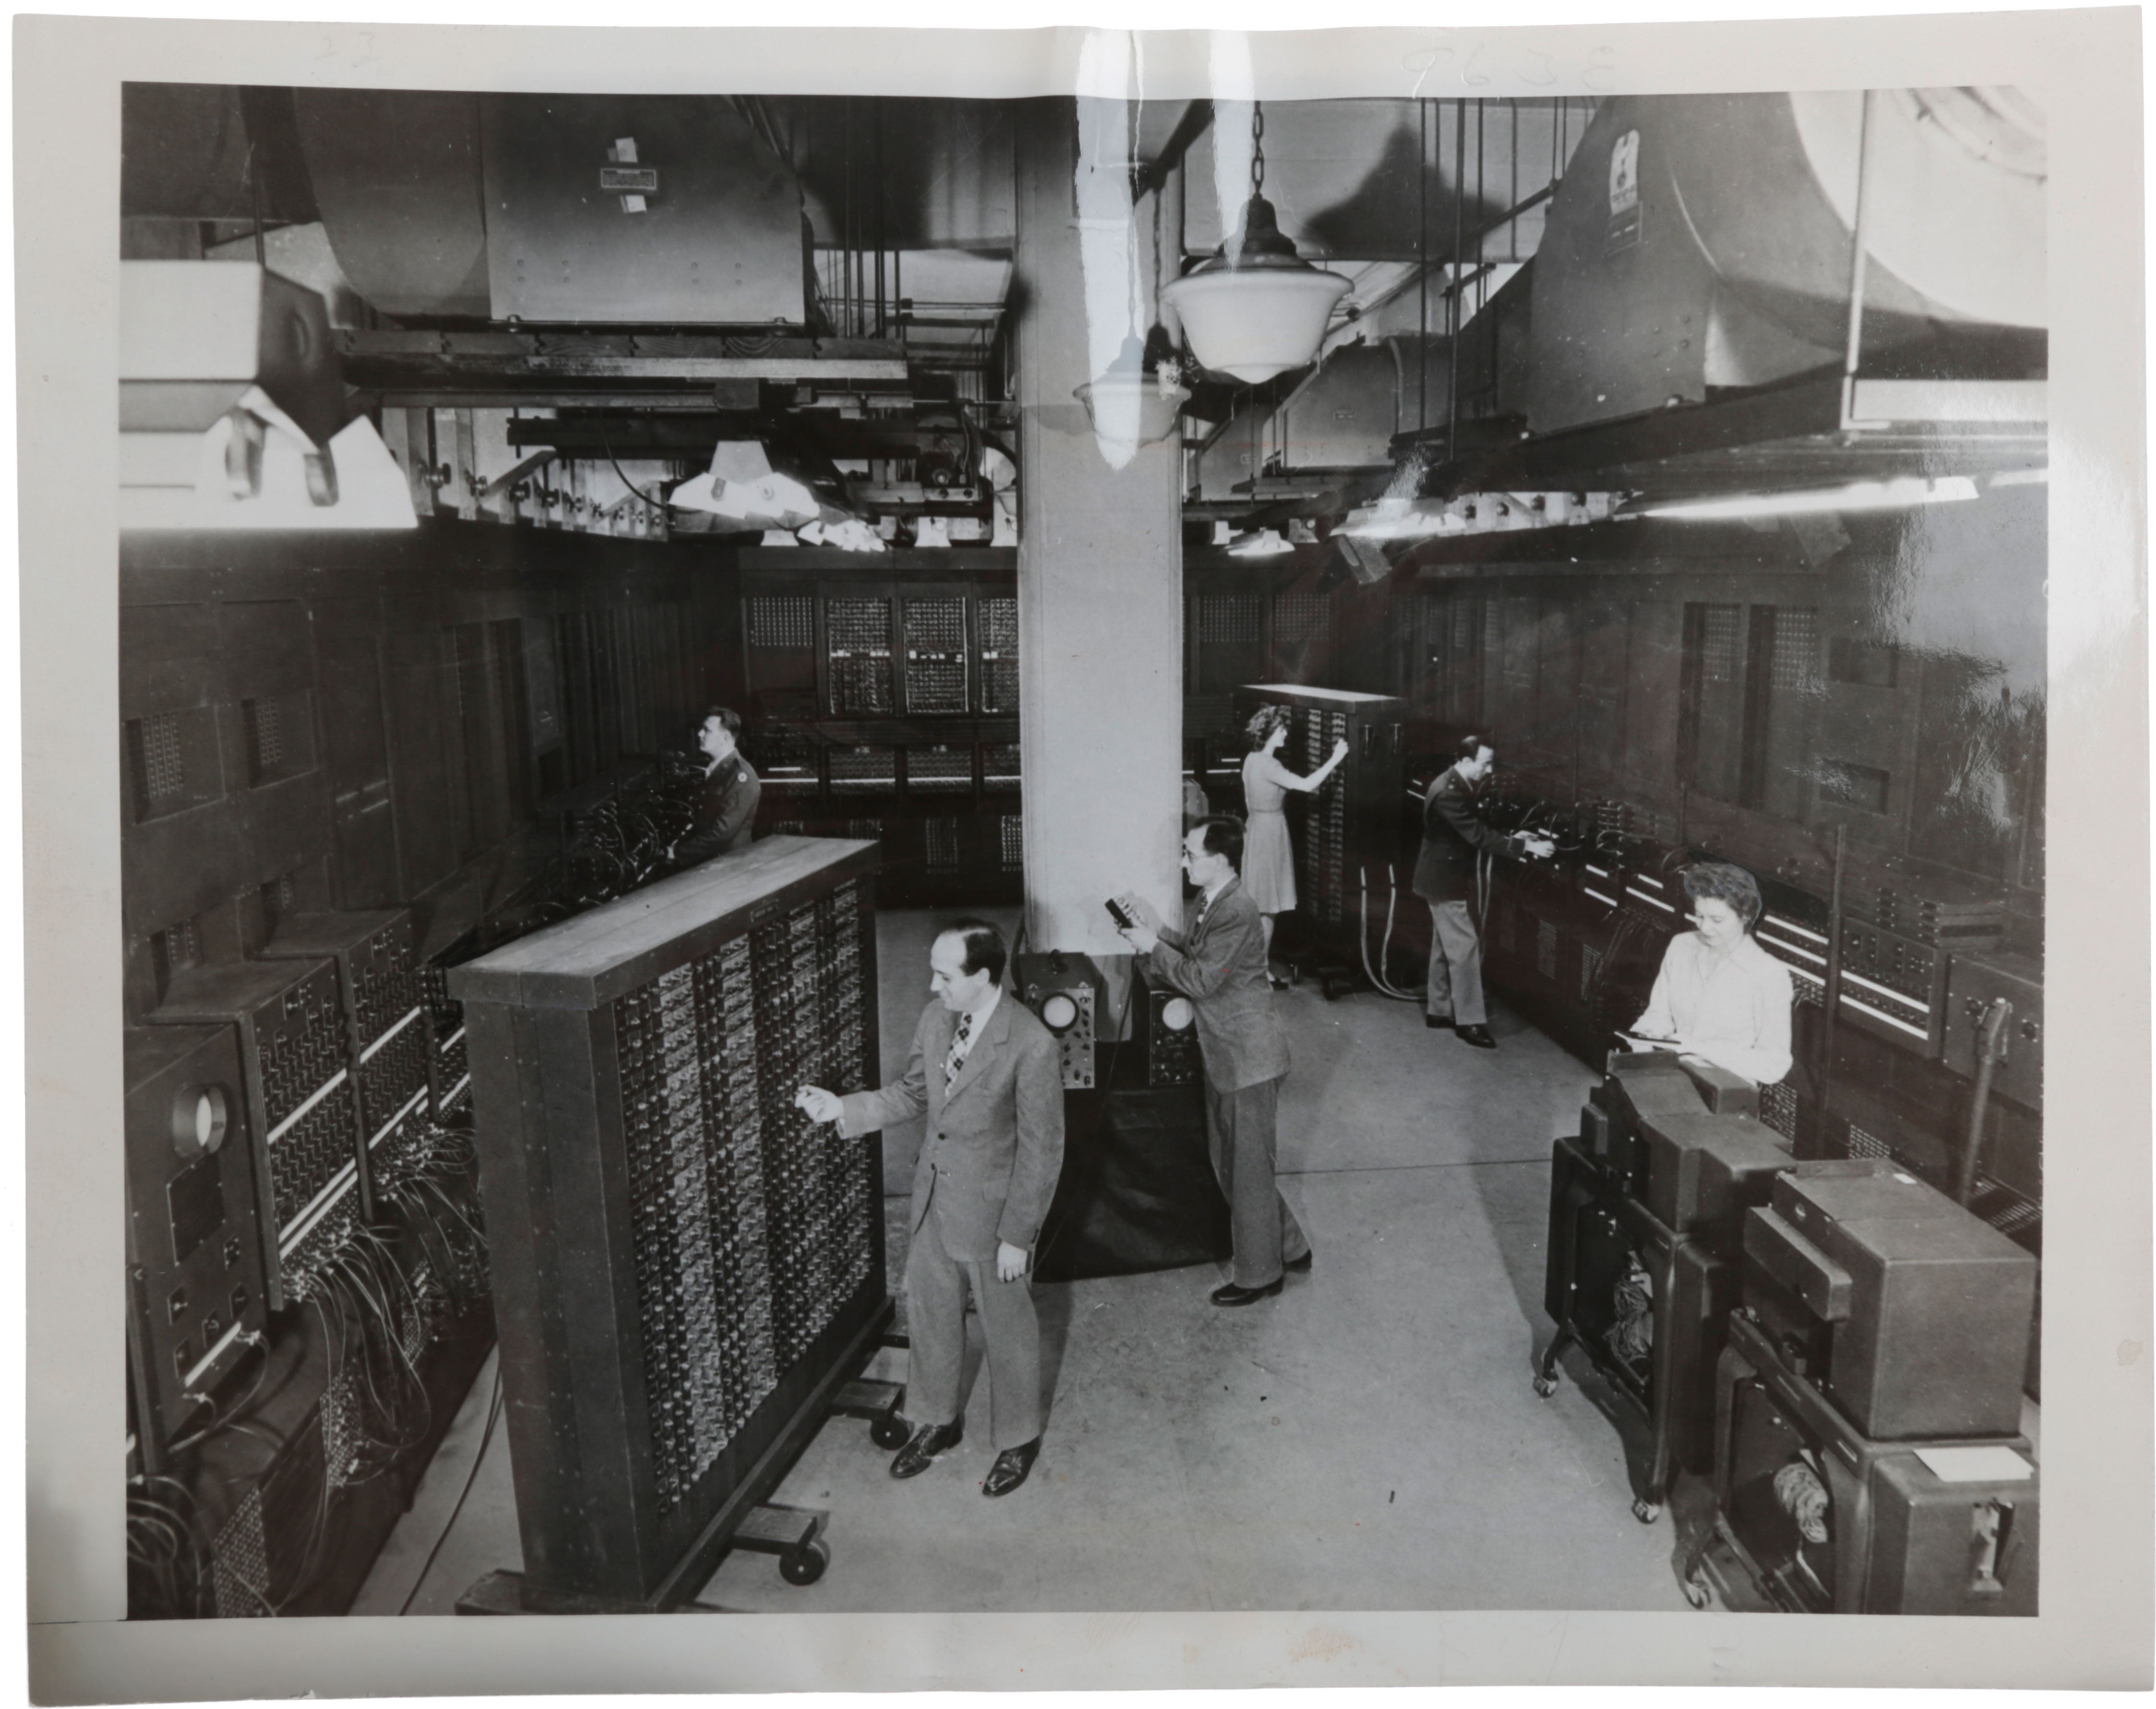 Item #5514 Photograph of ENIAC (Electronic Numerical Integrator And Computer), ca. 1945, showing Pres Eckert (centre left) and John Mauchly (centre right) working with the machine, as well as (left to right) Pfc. Homer Spence, Betty Jean Jennings, Herman H. Goldstine and Ruth Lichterman. ENIAC.